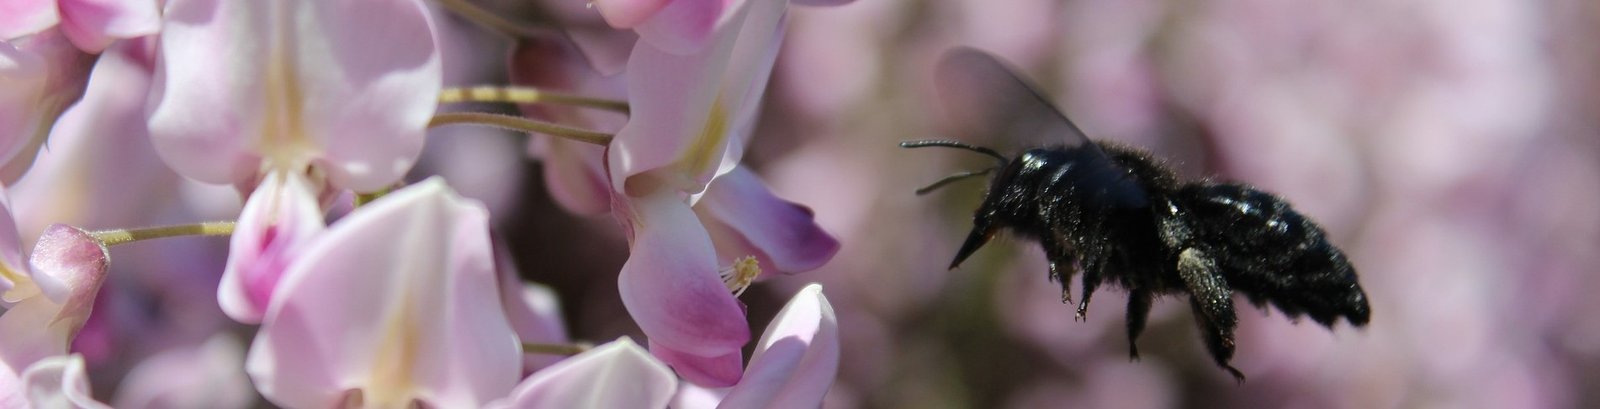 Image of carpenter bee attempting to extract nectar